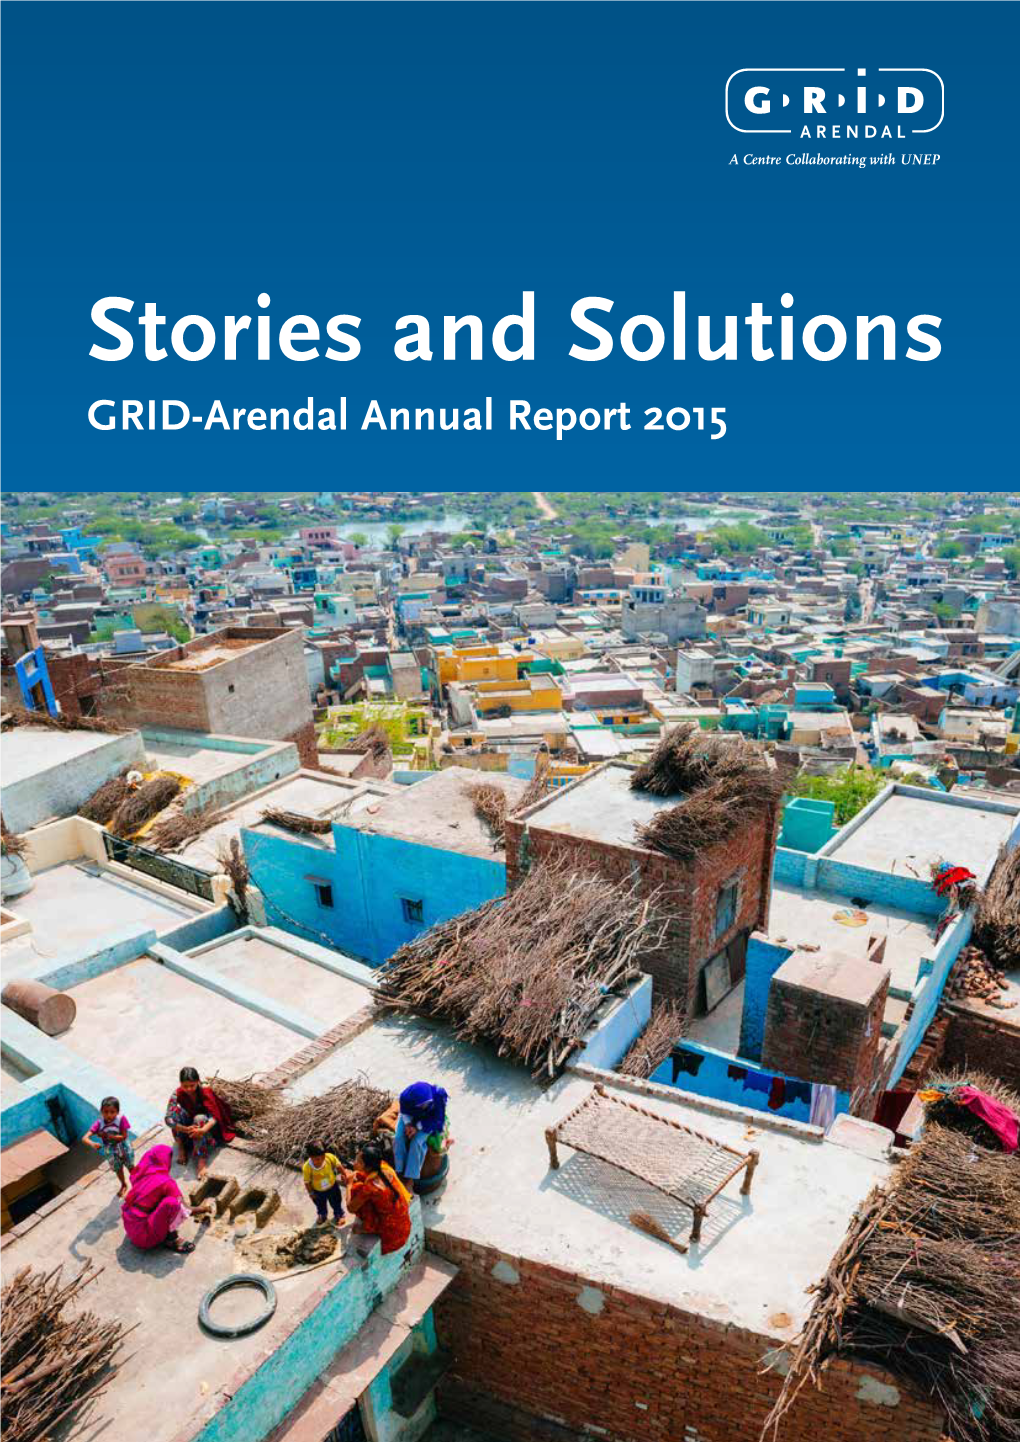 Stories and Solutions GRID-Arendal Annual Report 2015 Established in 1989, GRID-Arendal’S Mission Is to Create Environmental Knowledge That Encourages Positive Change